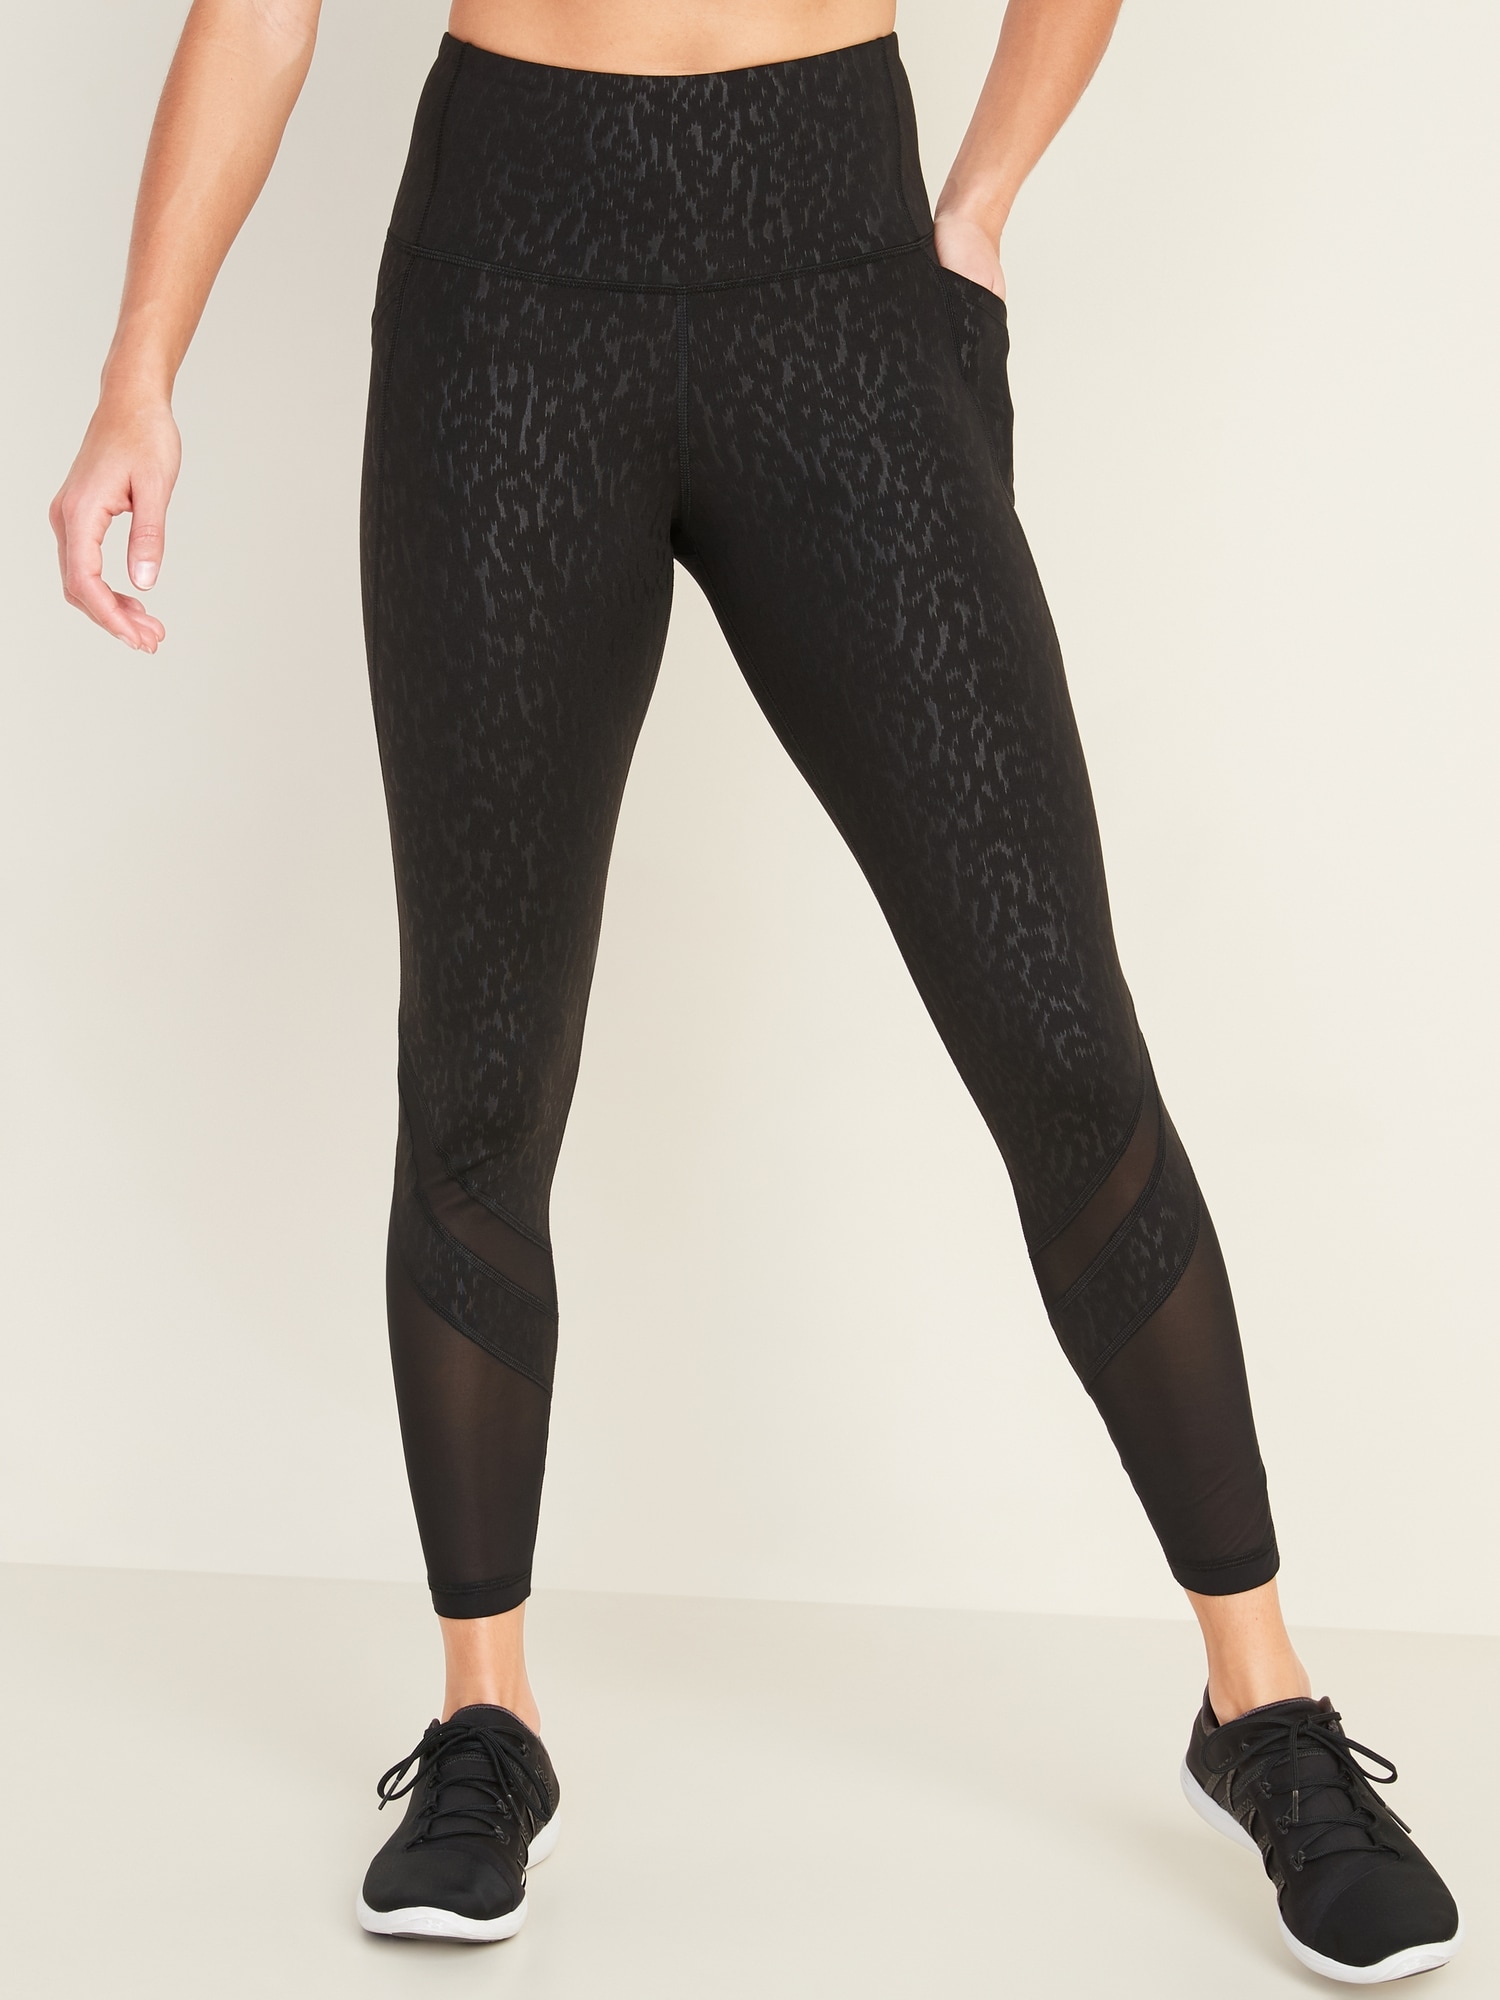 High-Waisted Elevate 7/8-Length Mesh-Trim Compression Leggings for Women